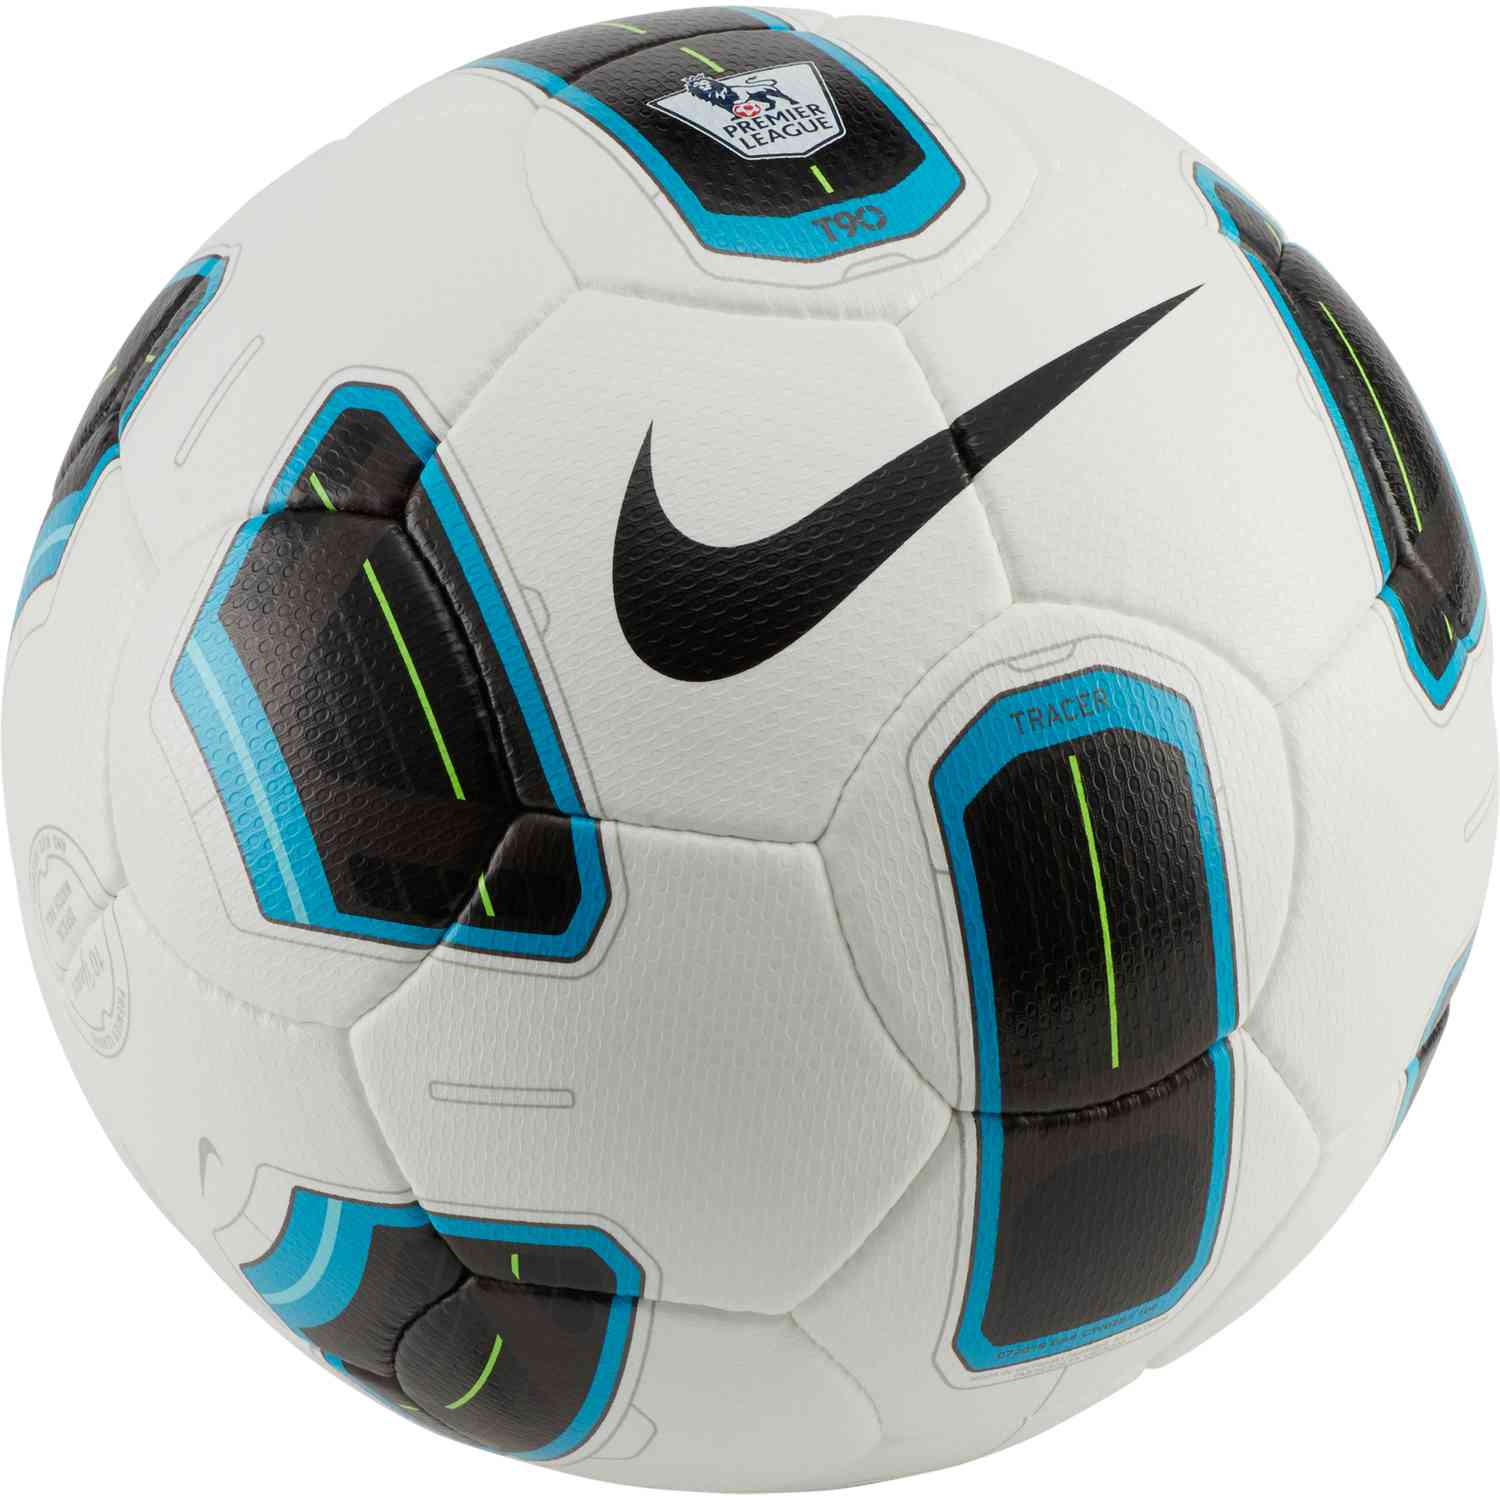 Nike Premier League Tracer Official Match Ball - White & Blue with Black - Soccer Master